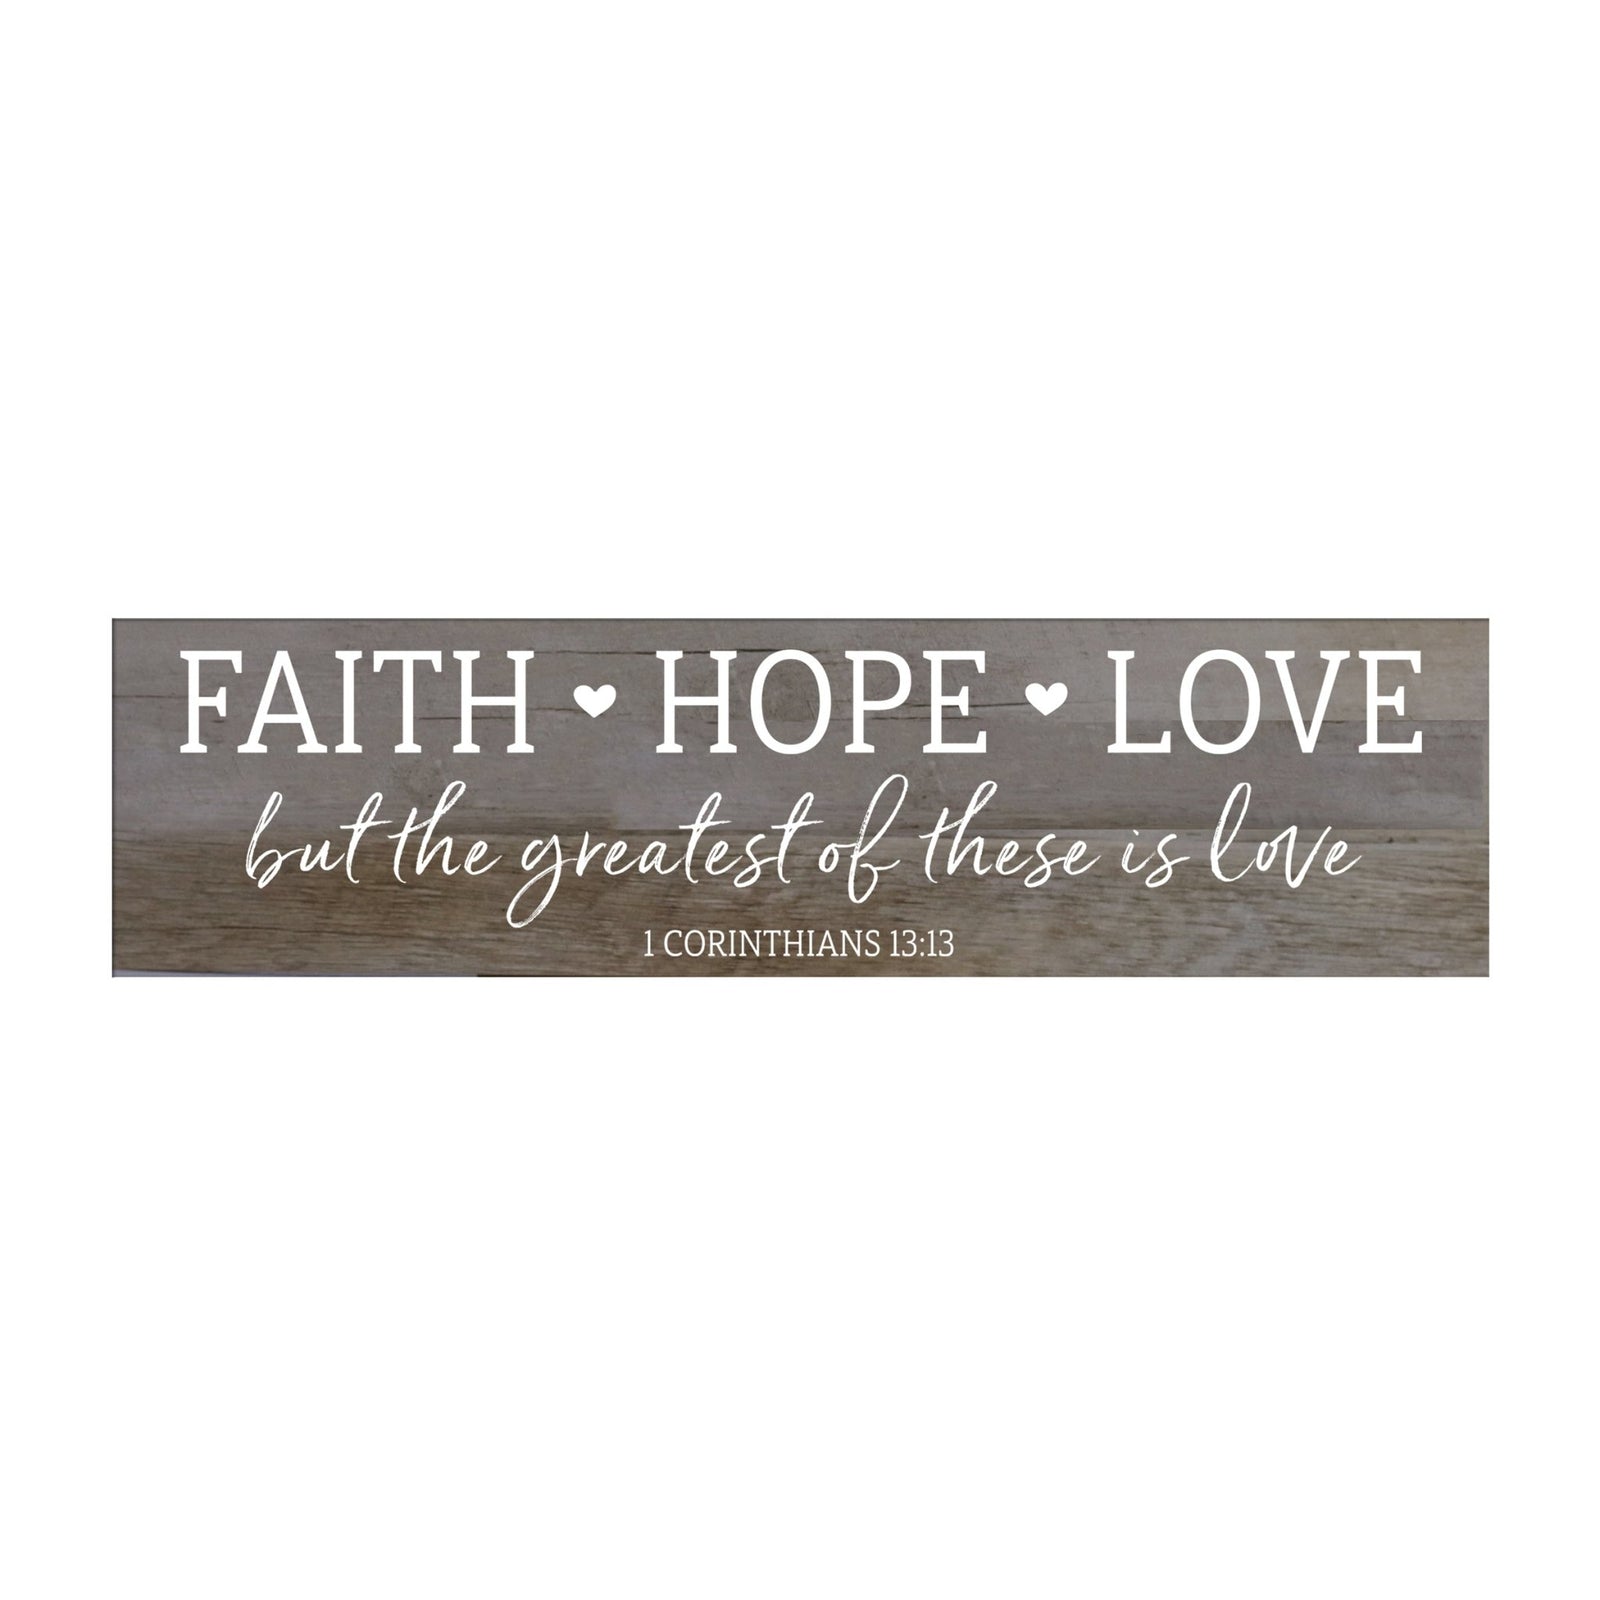 Inspirational Everyday Home and Family Wooden Wall Art Hanging Plaque 10 x 40 – Faith Hope Love - LifeSong Milestones